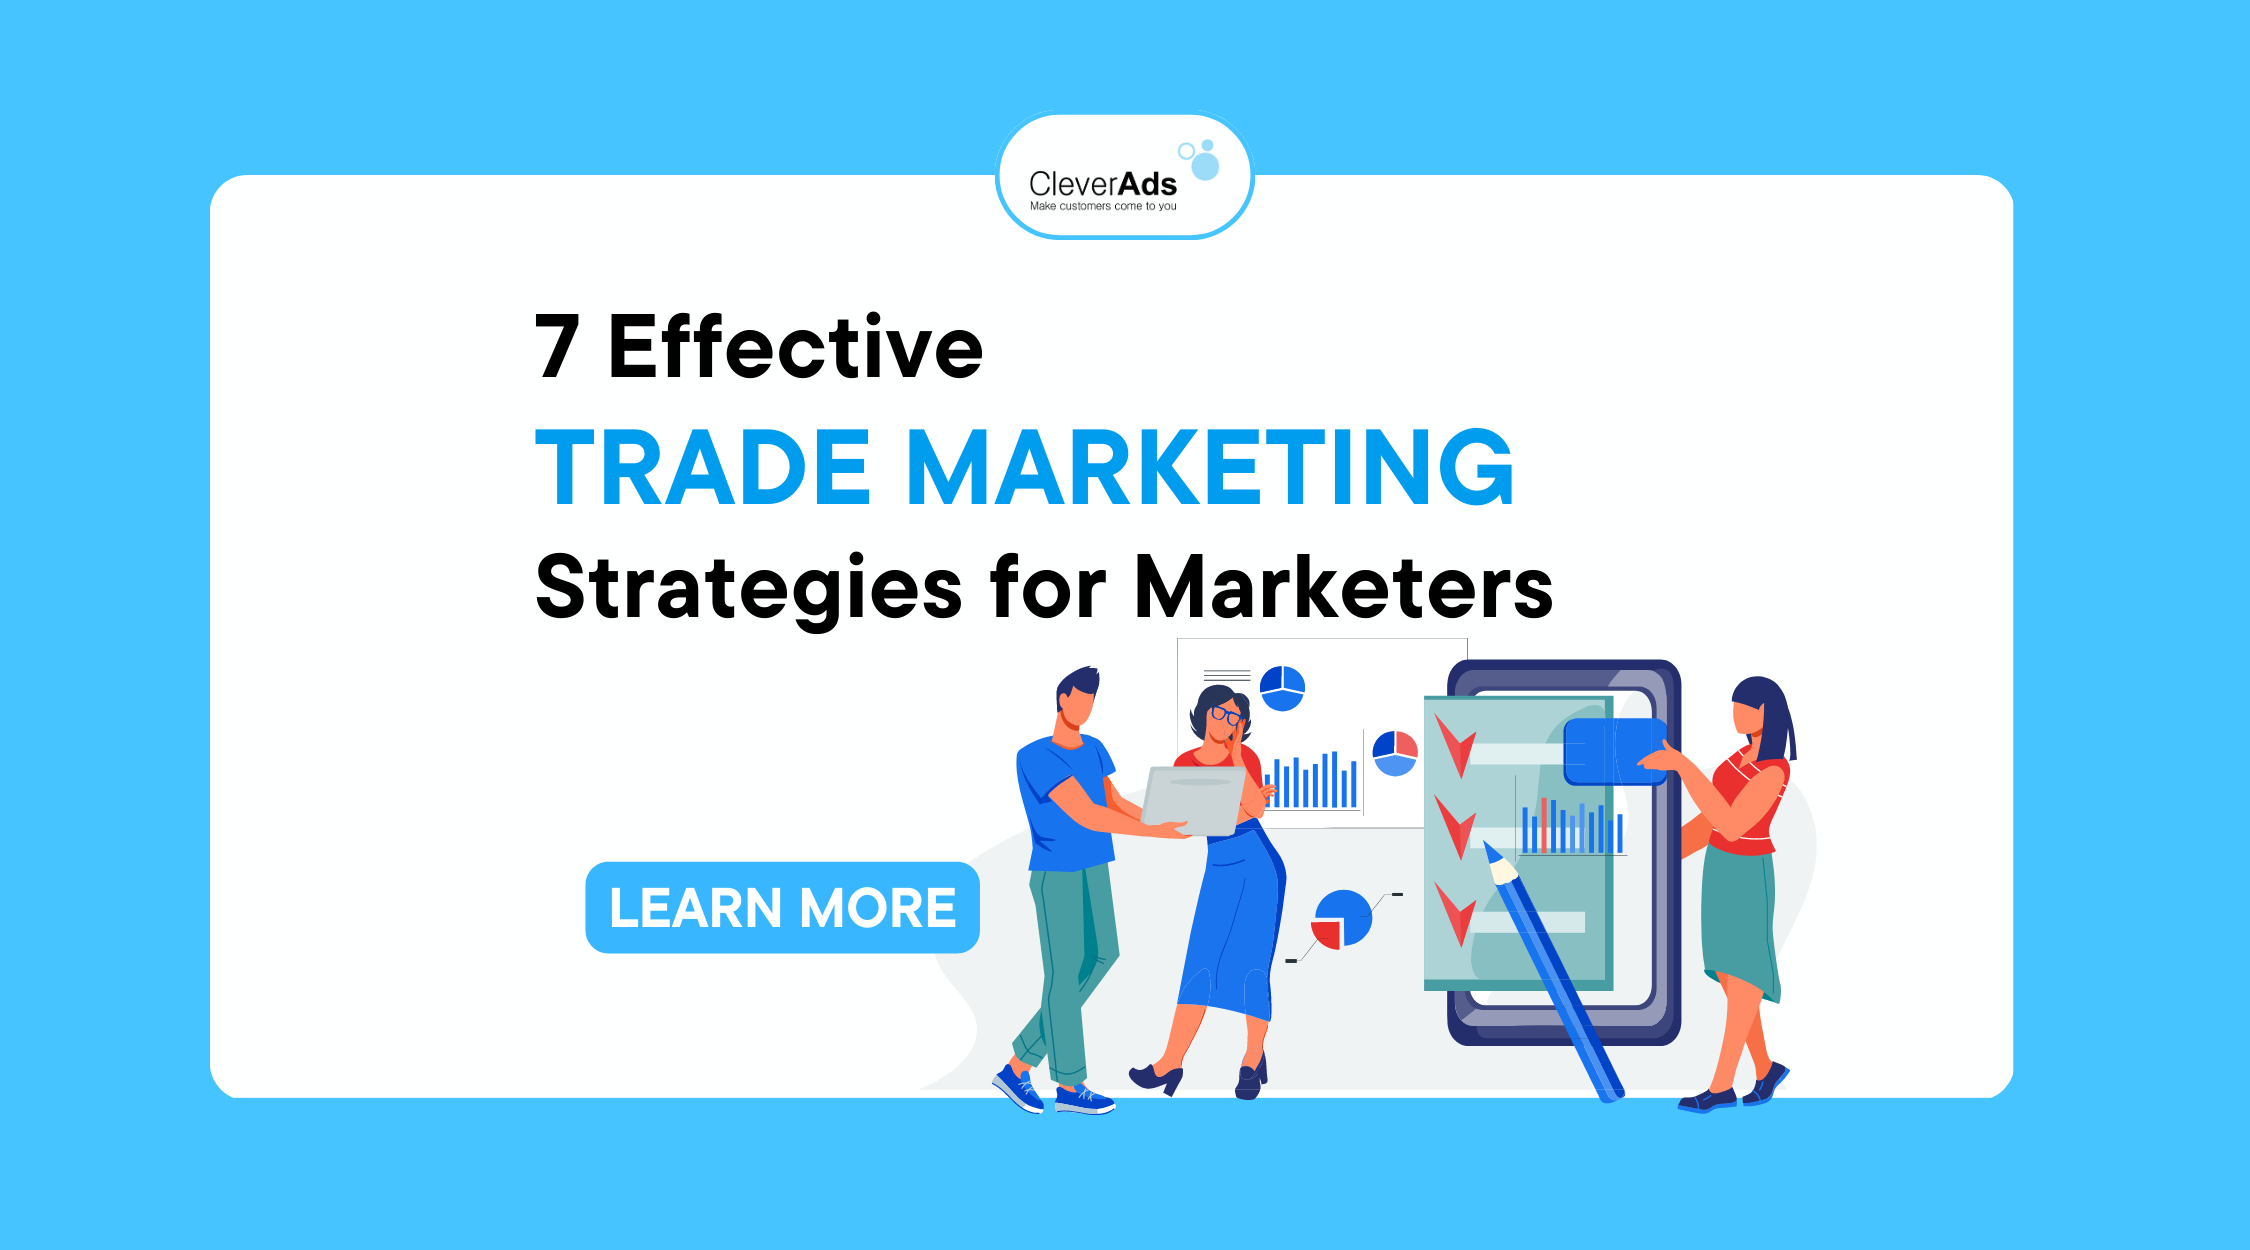 7 Effective Trade Marketing Strategies for Marketers